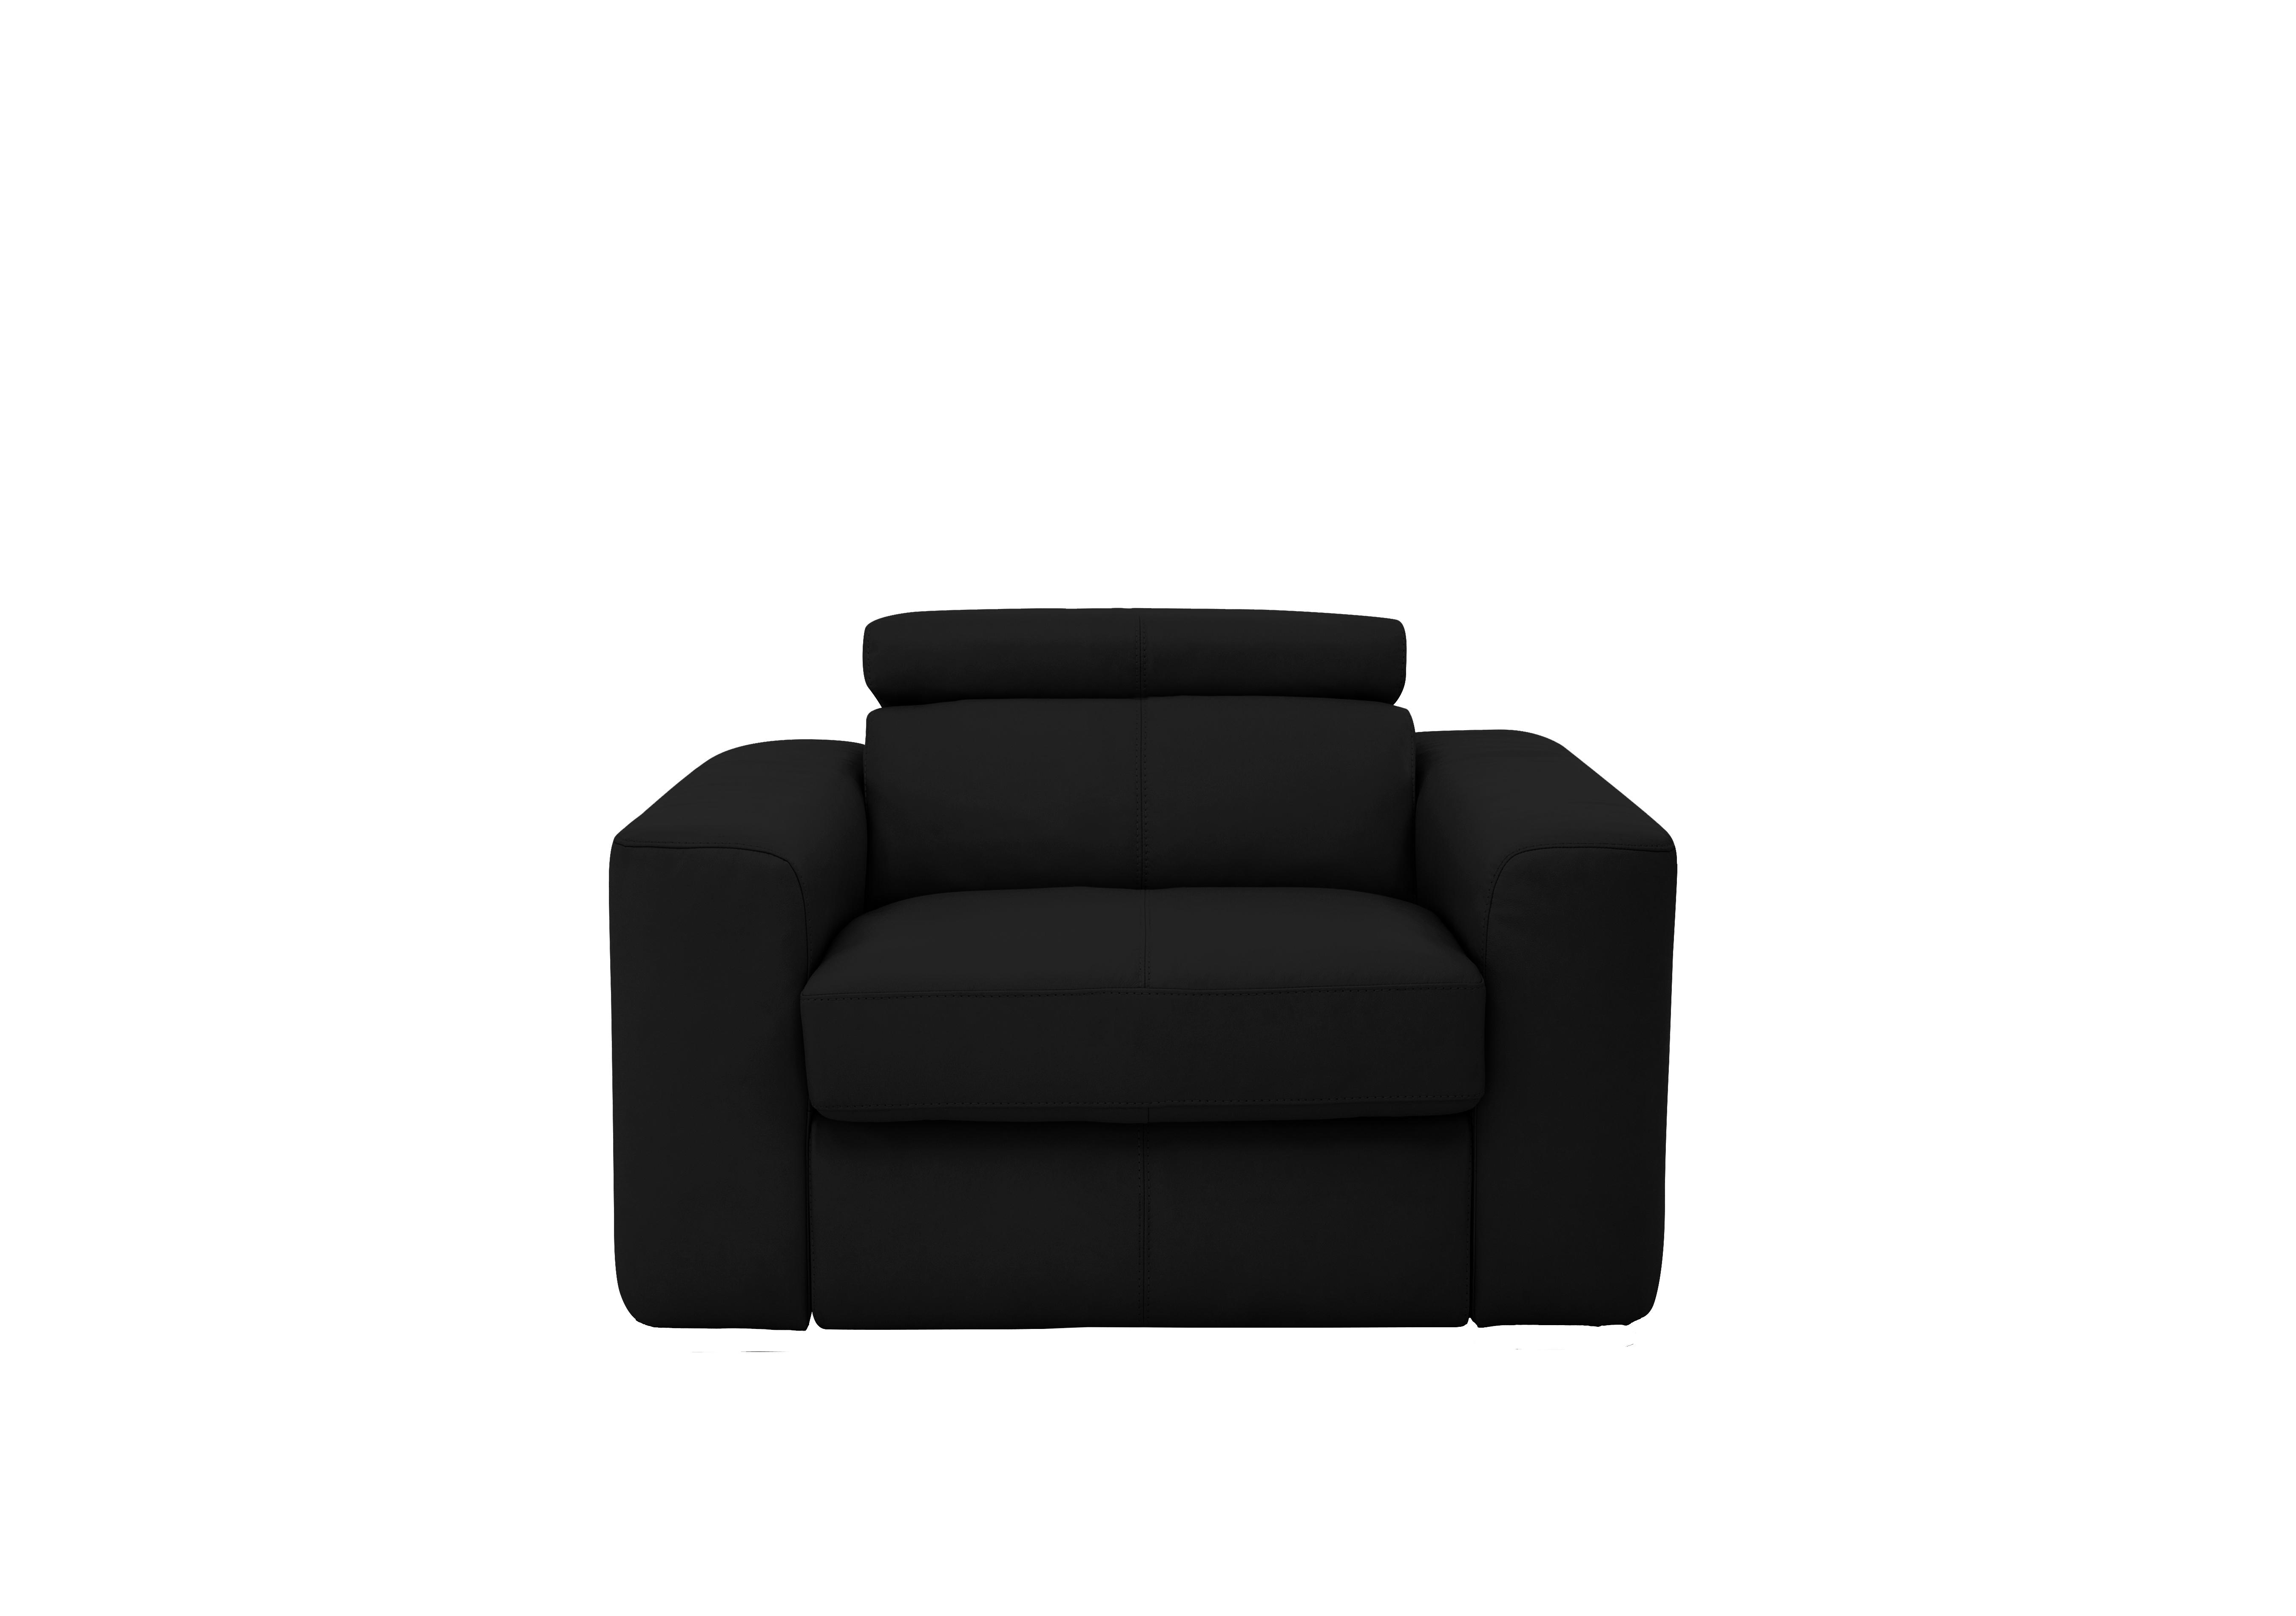 Infinity Leather Armchair in Bv-3500 Classic Black on Furniture Village